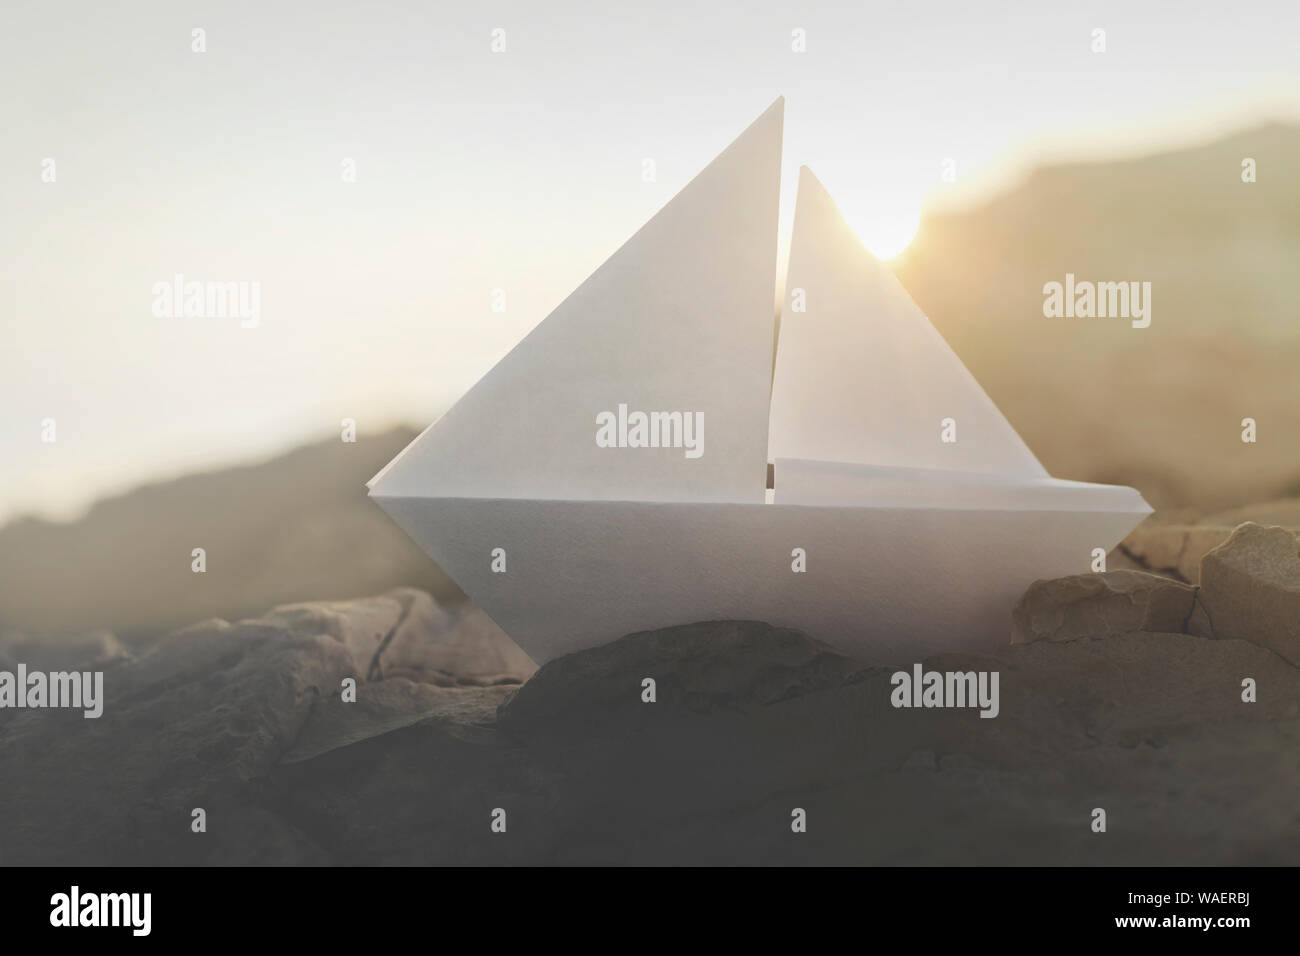 origami boat sails on the rocks illuminated by the sun Stock Photo